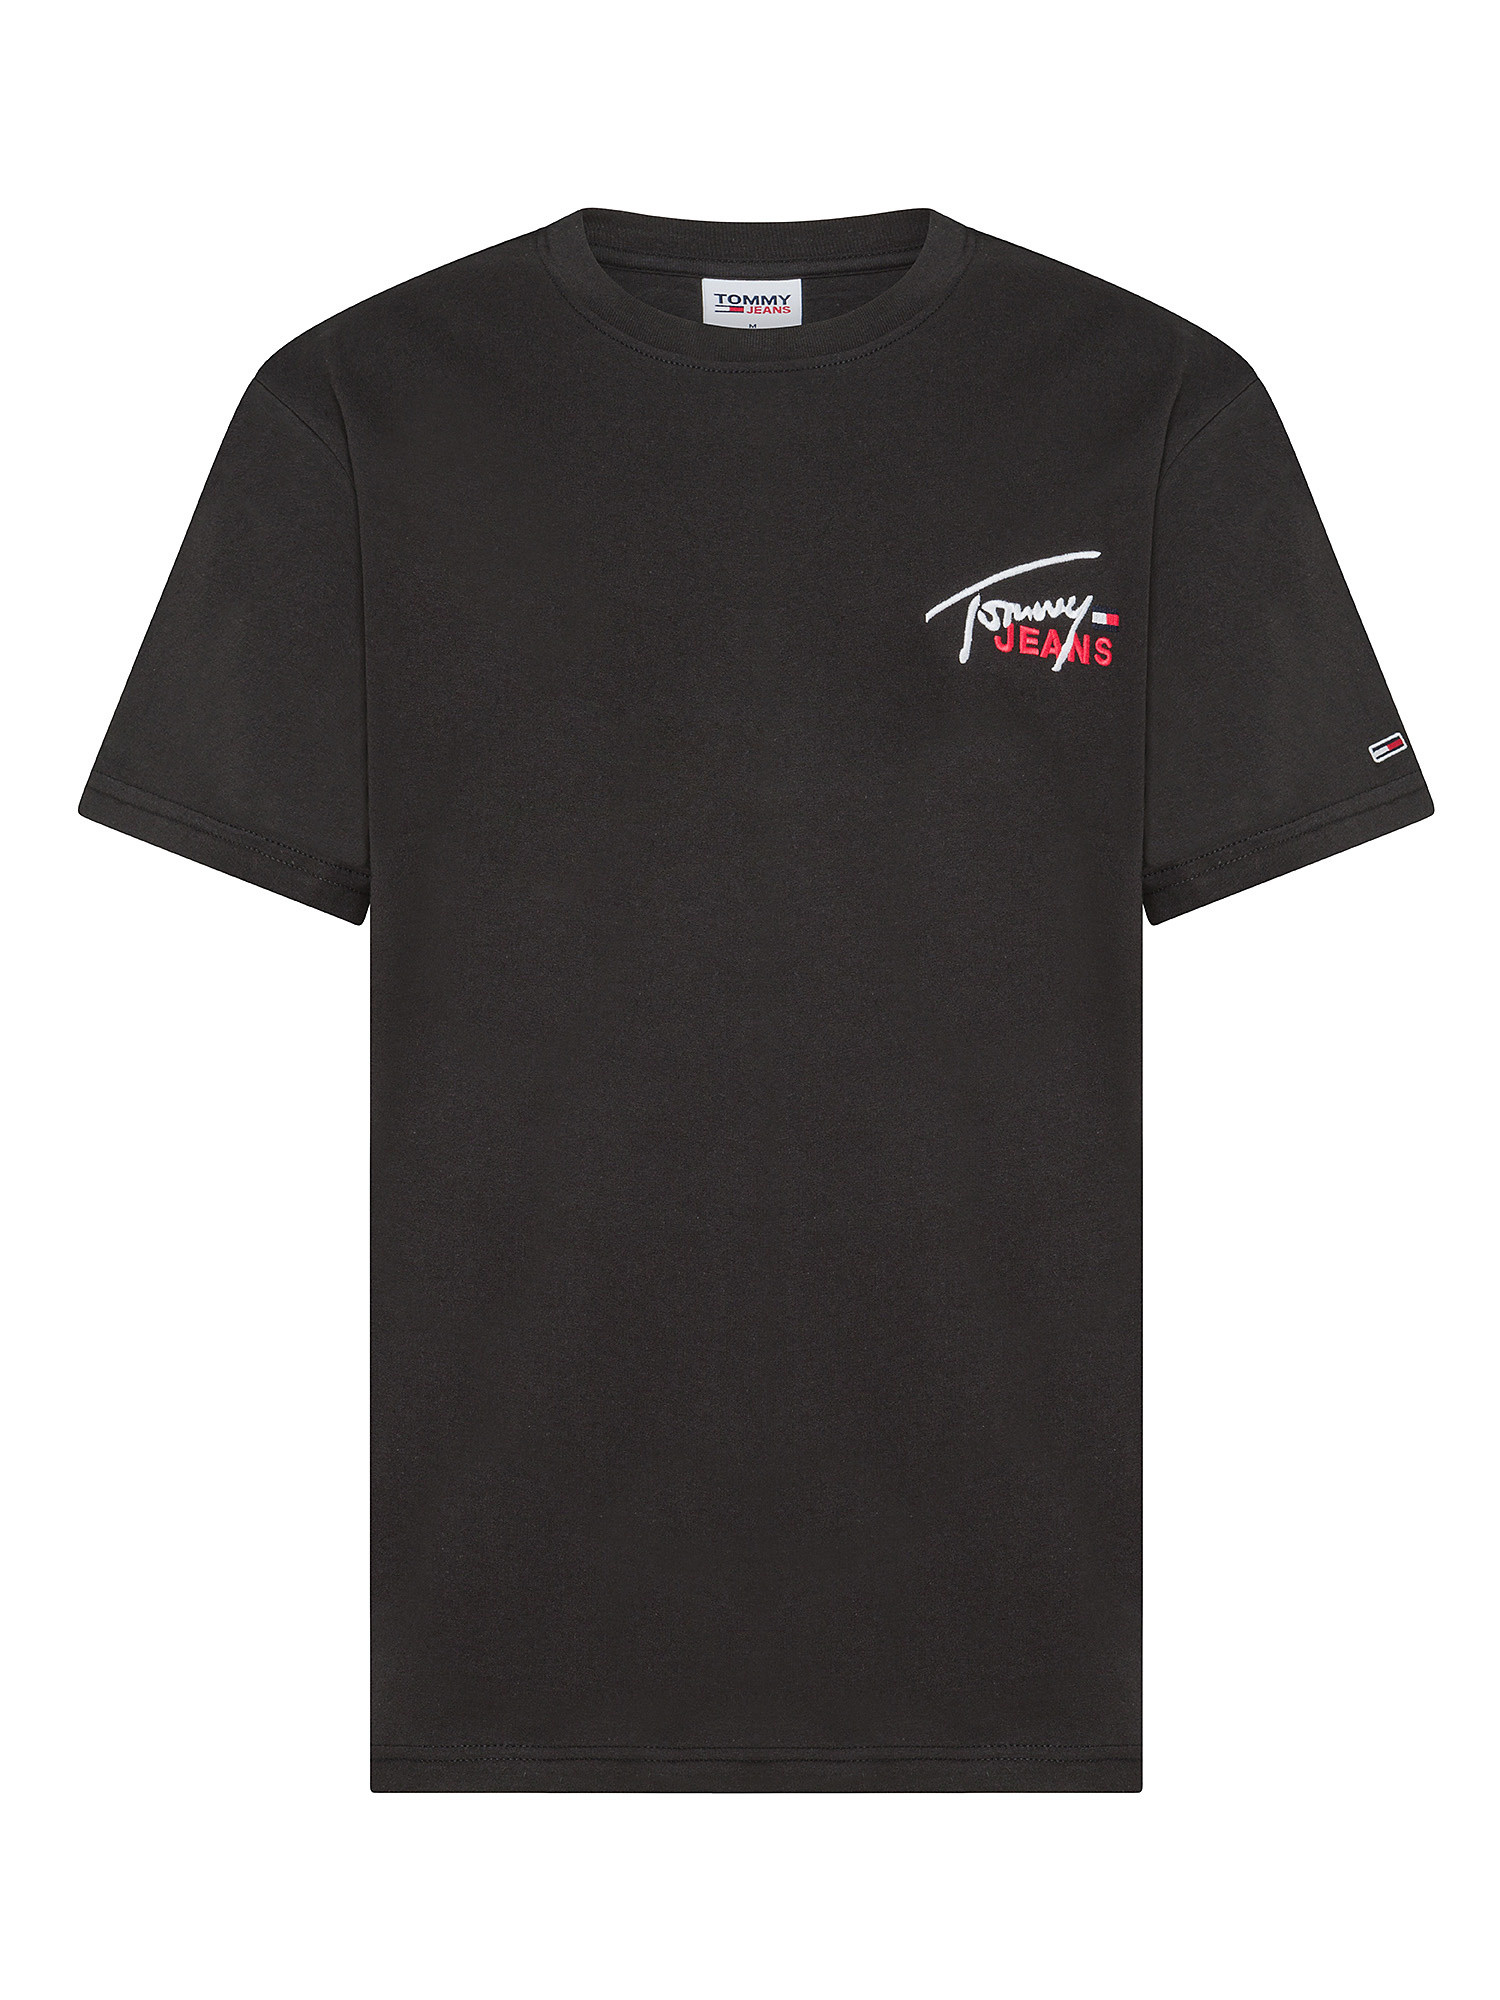 Tommy Jeans - T-shirt girocollo in cotone con logo ricamato, Nero, large image number 0